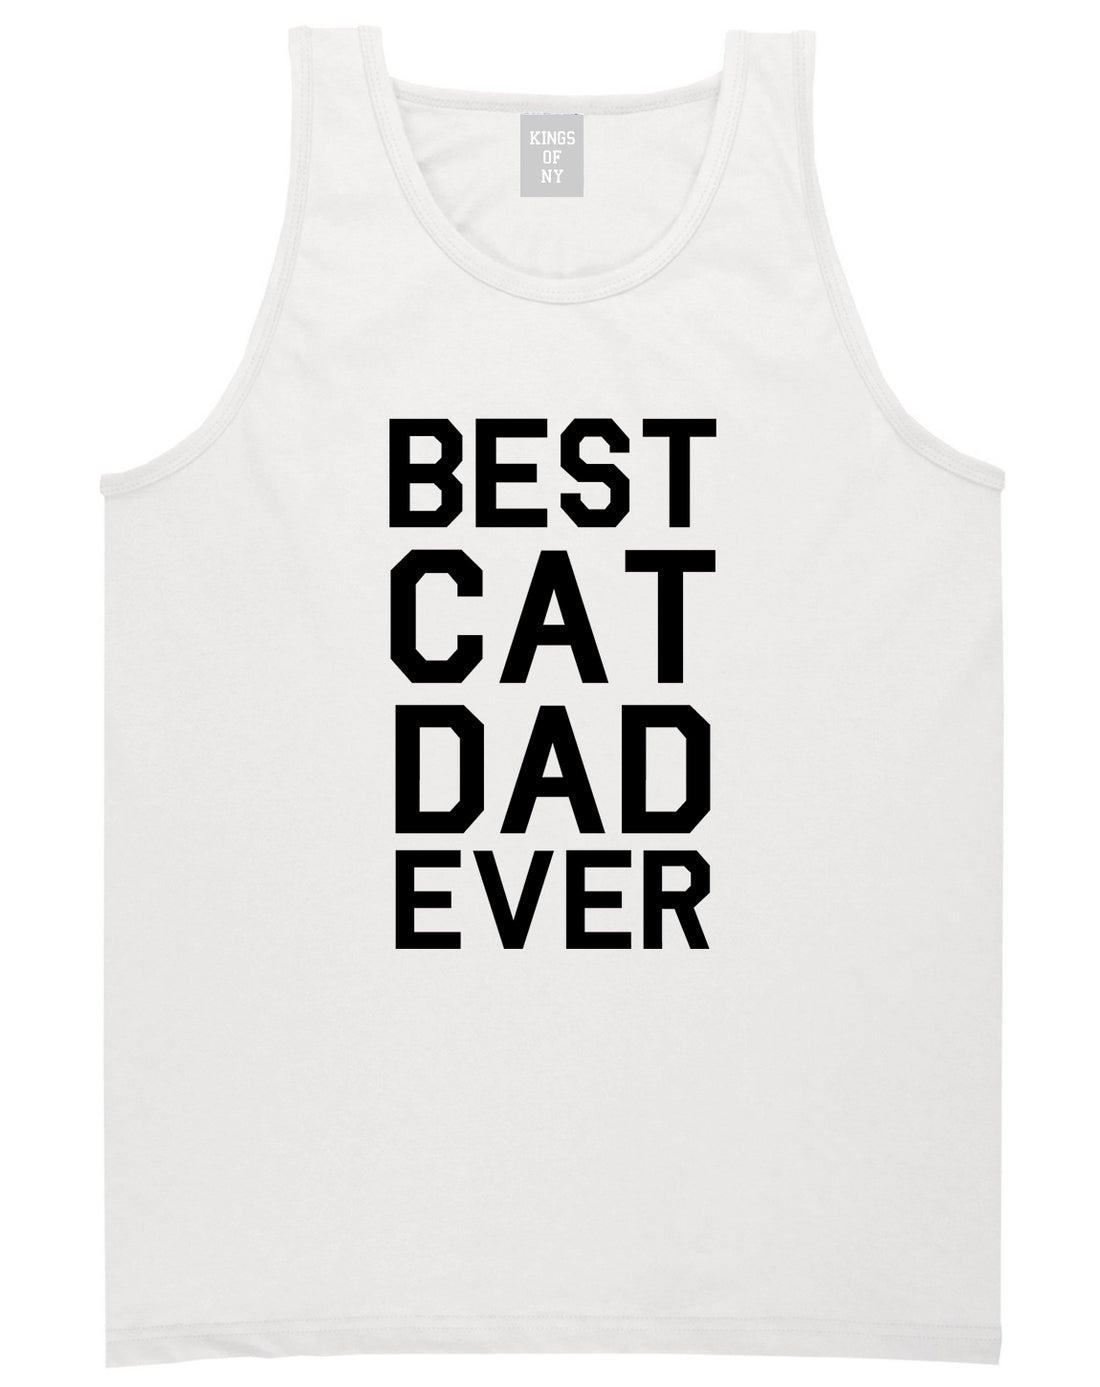 Best_Cat_Dad_Ever Mens White Tank Top Shirt by Kings Of NY